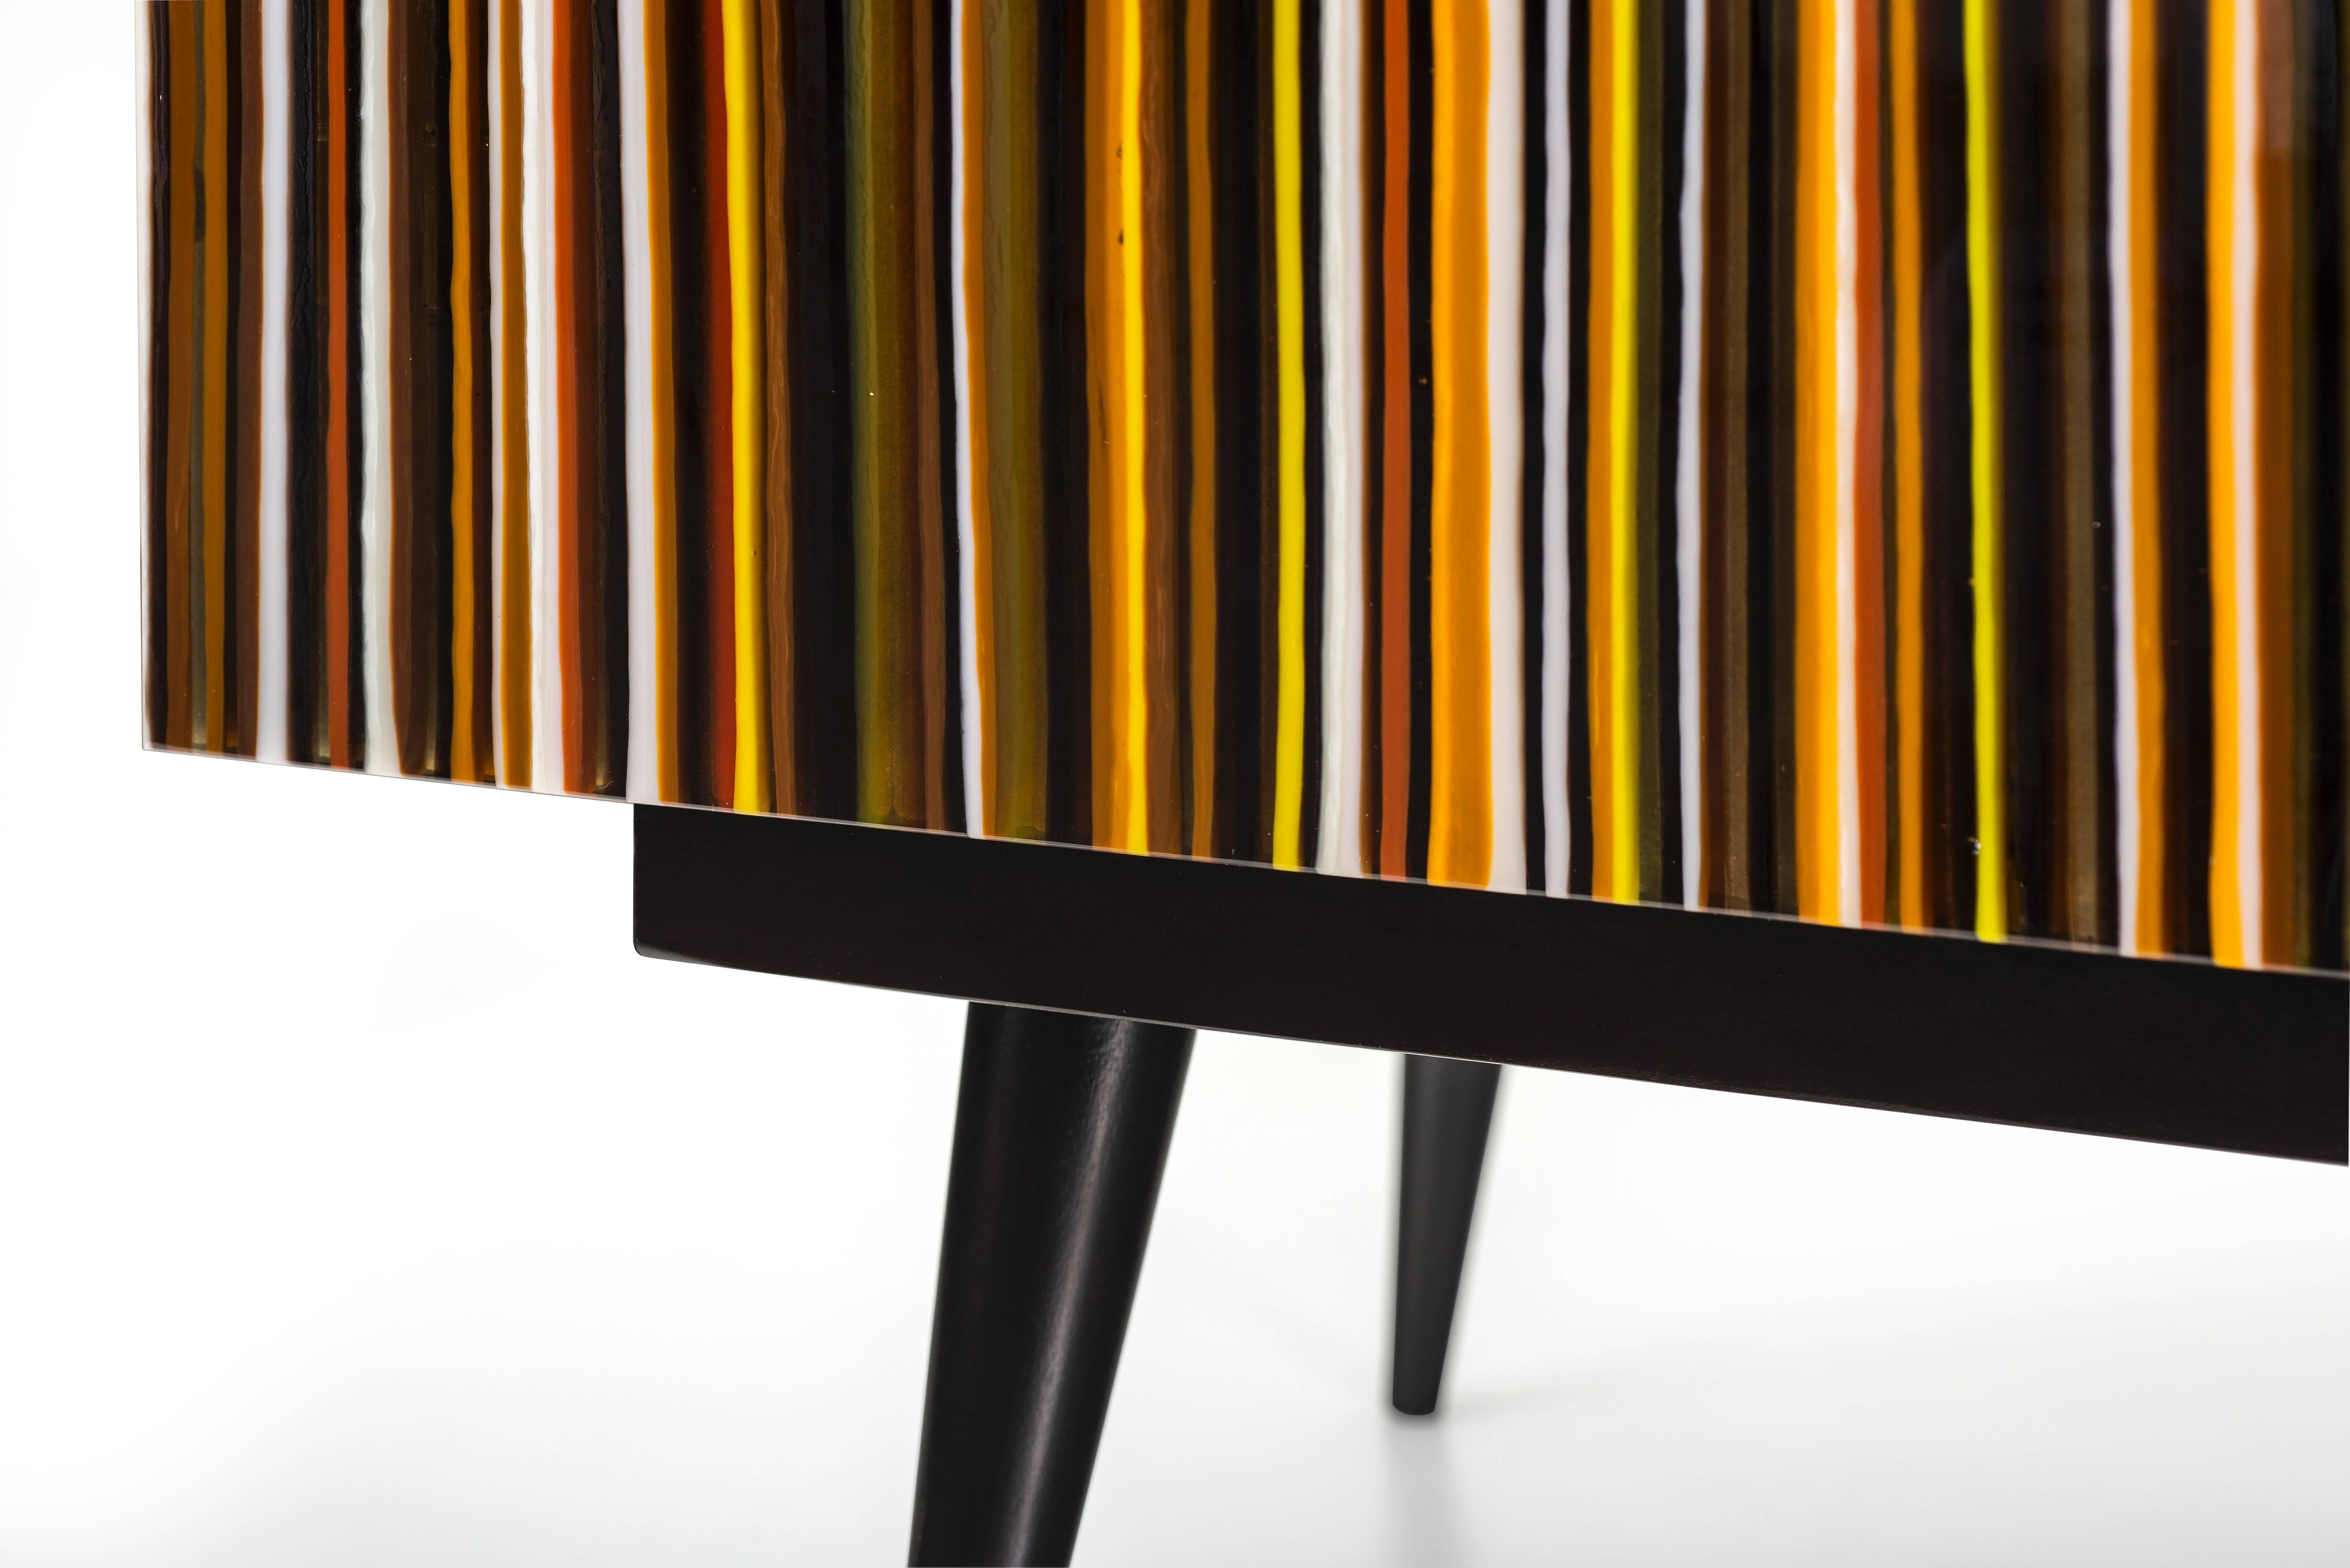 Credenza designed by Orfeo Quagliata in collaboration with Taracea Furniture. An object of fused glass created with the exclusive barcode technique. The Buff-Heyyy´s retro design mixed with designer's exceptional glass expertise put together a